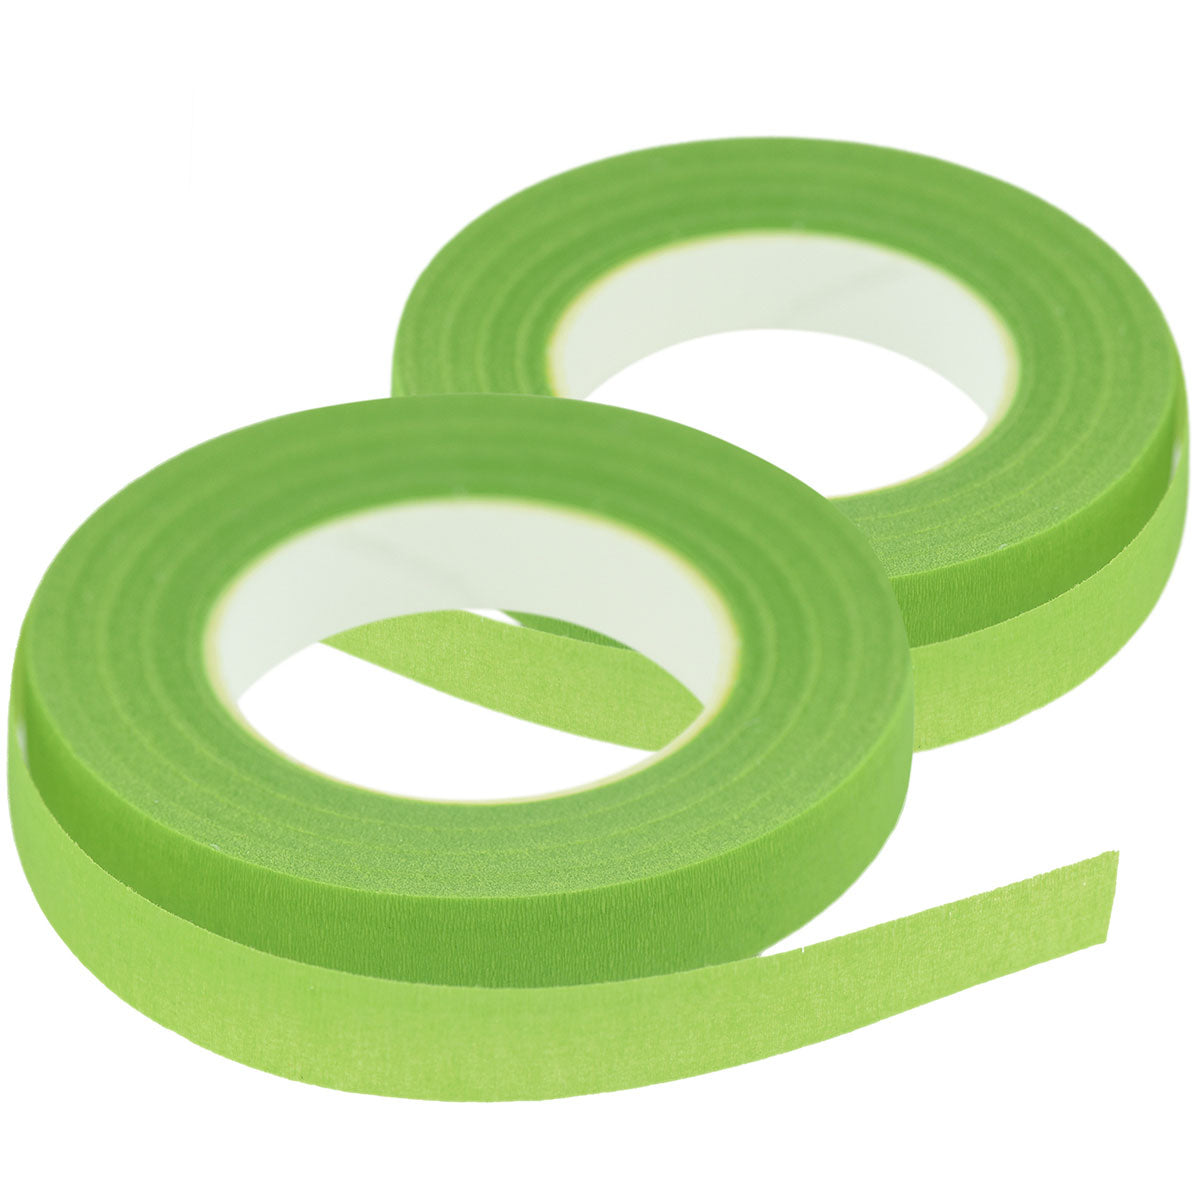 Lot of Crafting Supplies - 2 9.8 Round Floral Foam Rings & Green Leaf  Garland